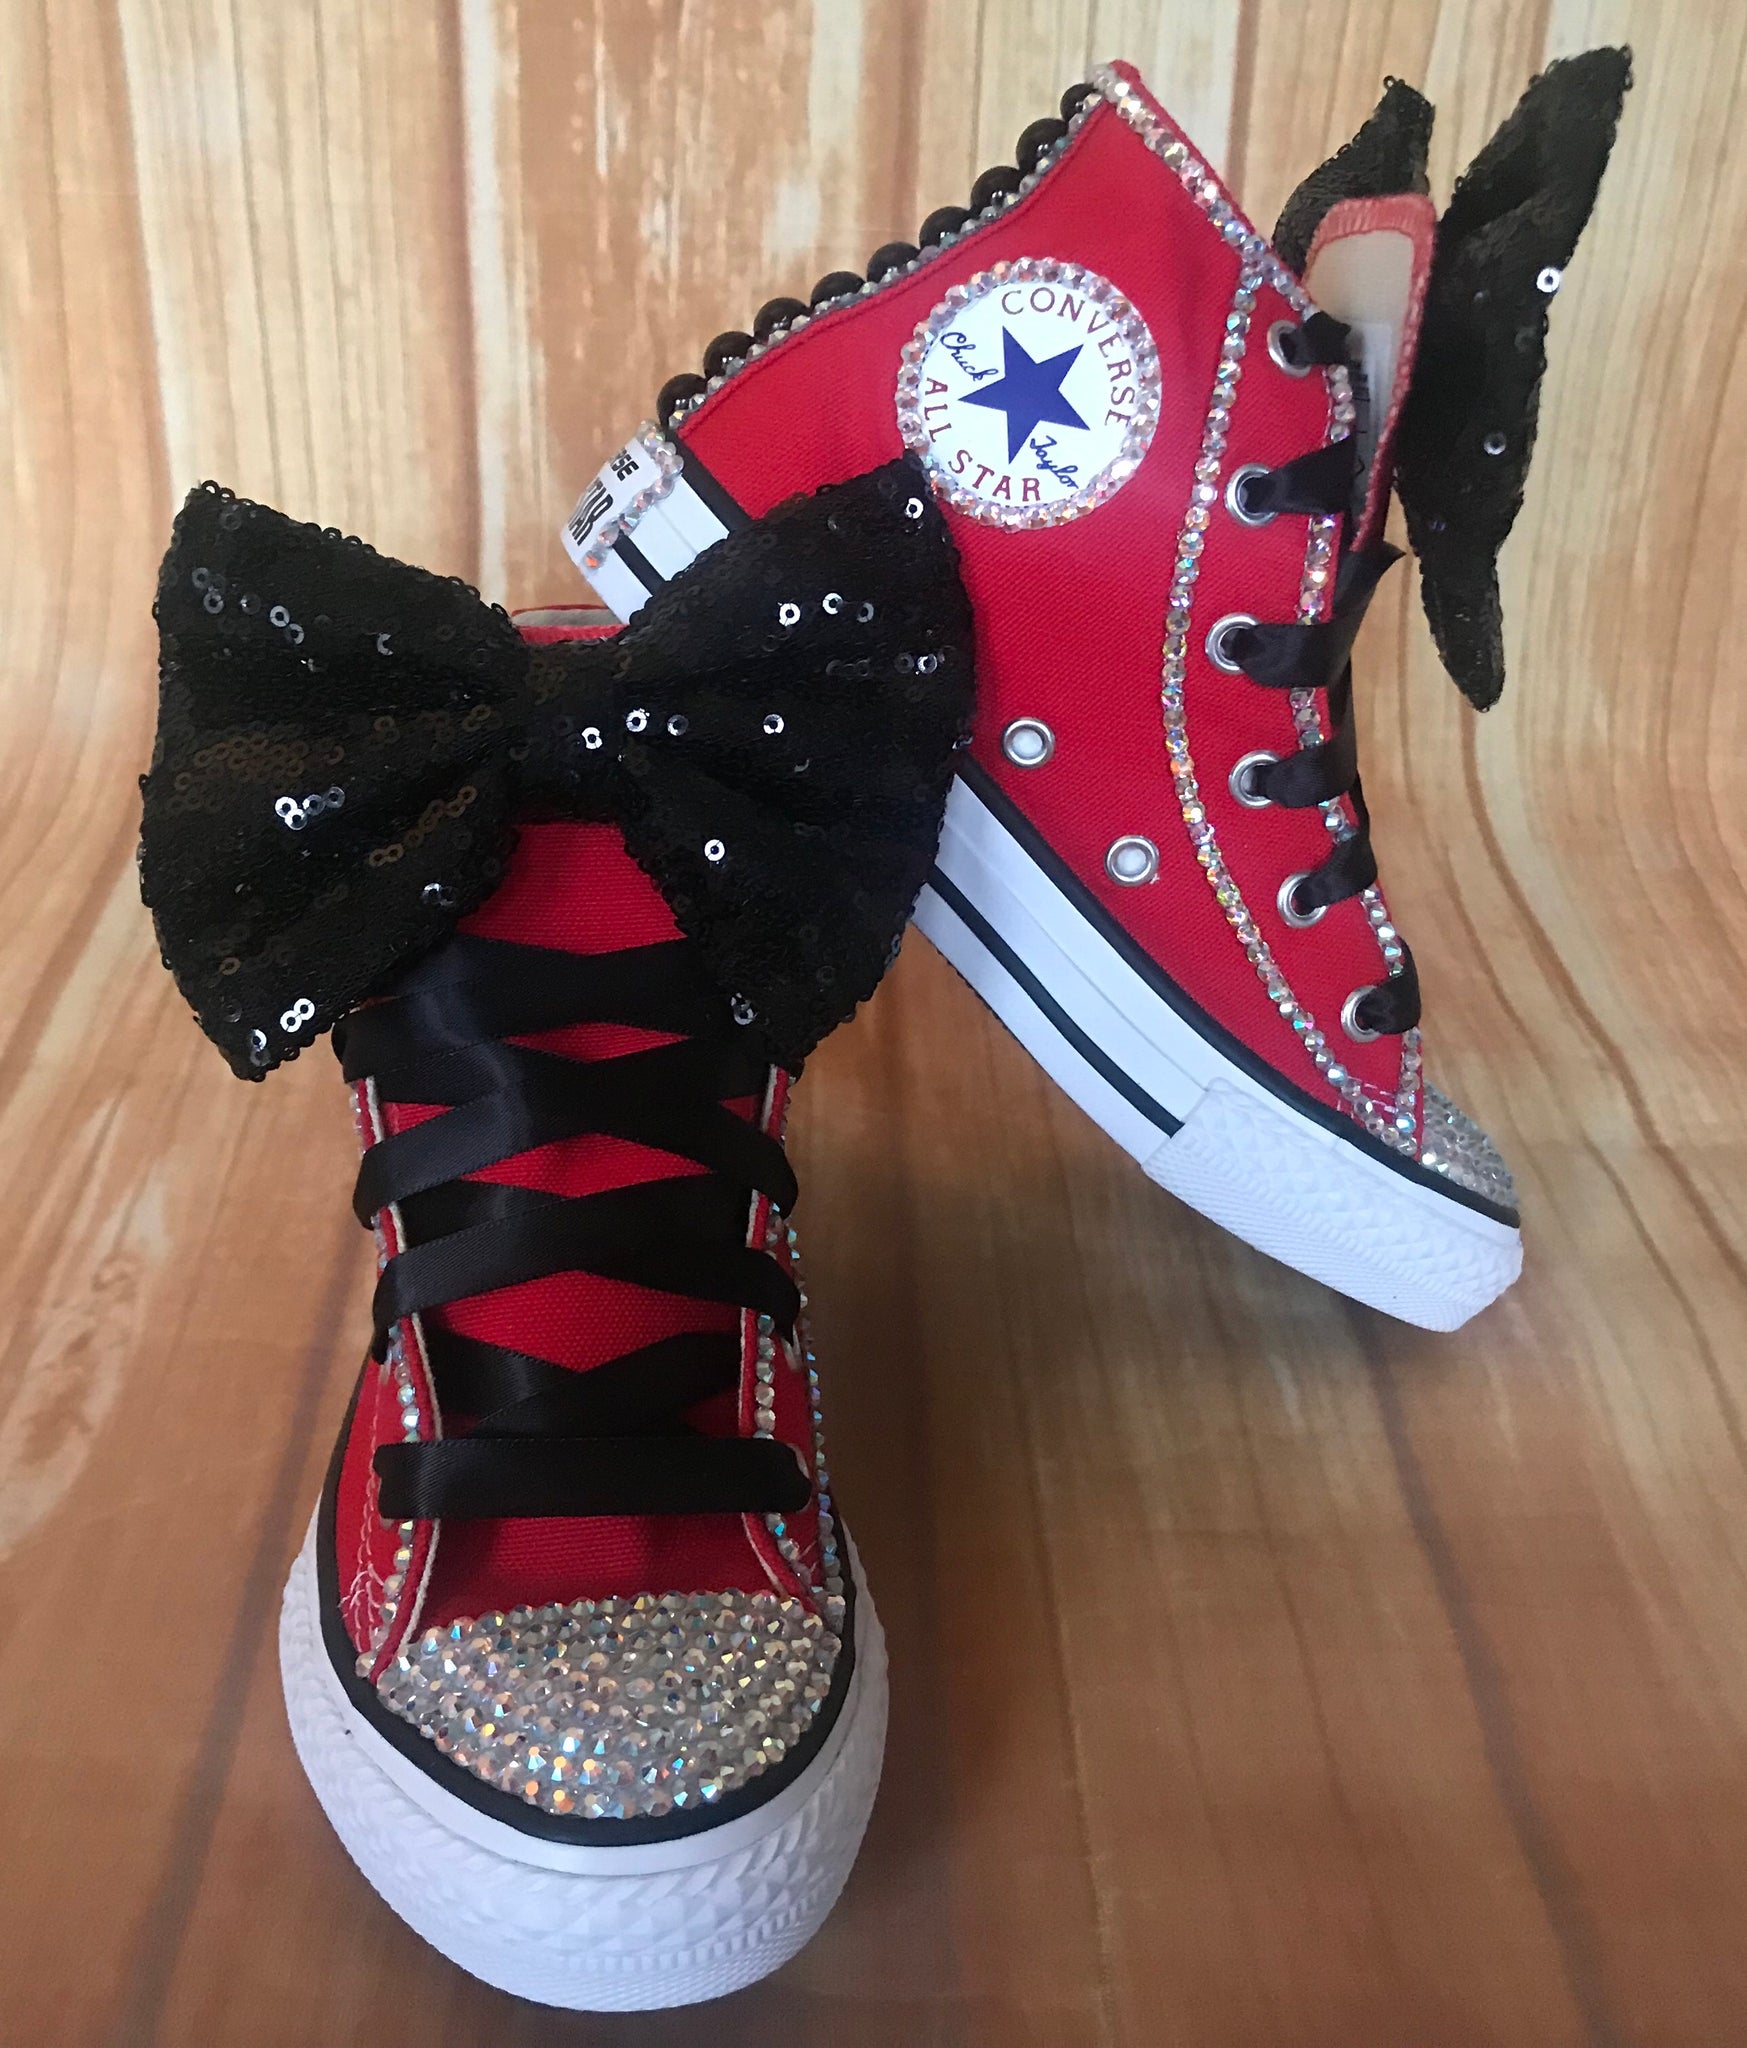 Red Converse of Bling Sneakers, Big Kids Shoe Size 3-6 Little Tutus